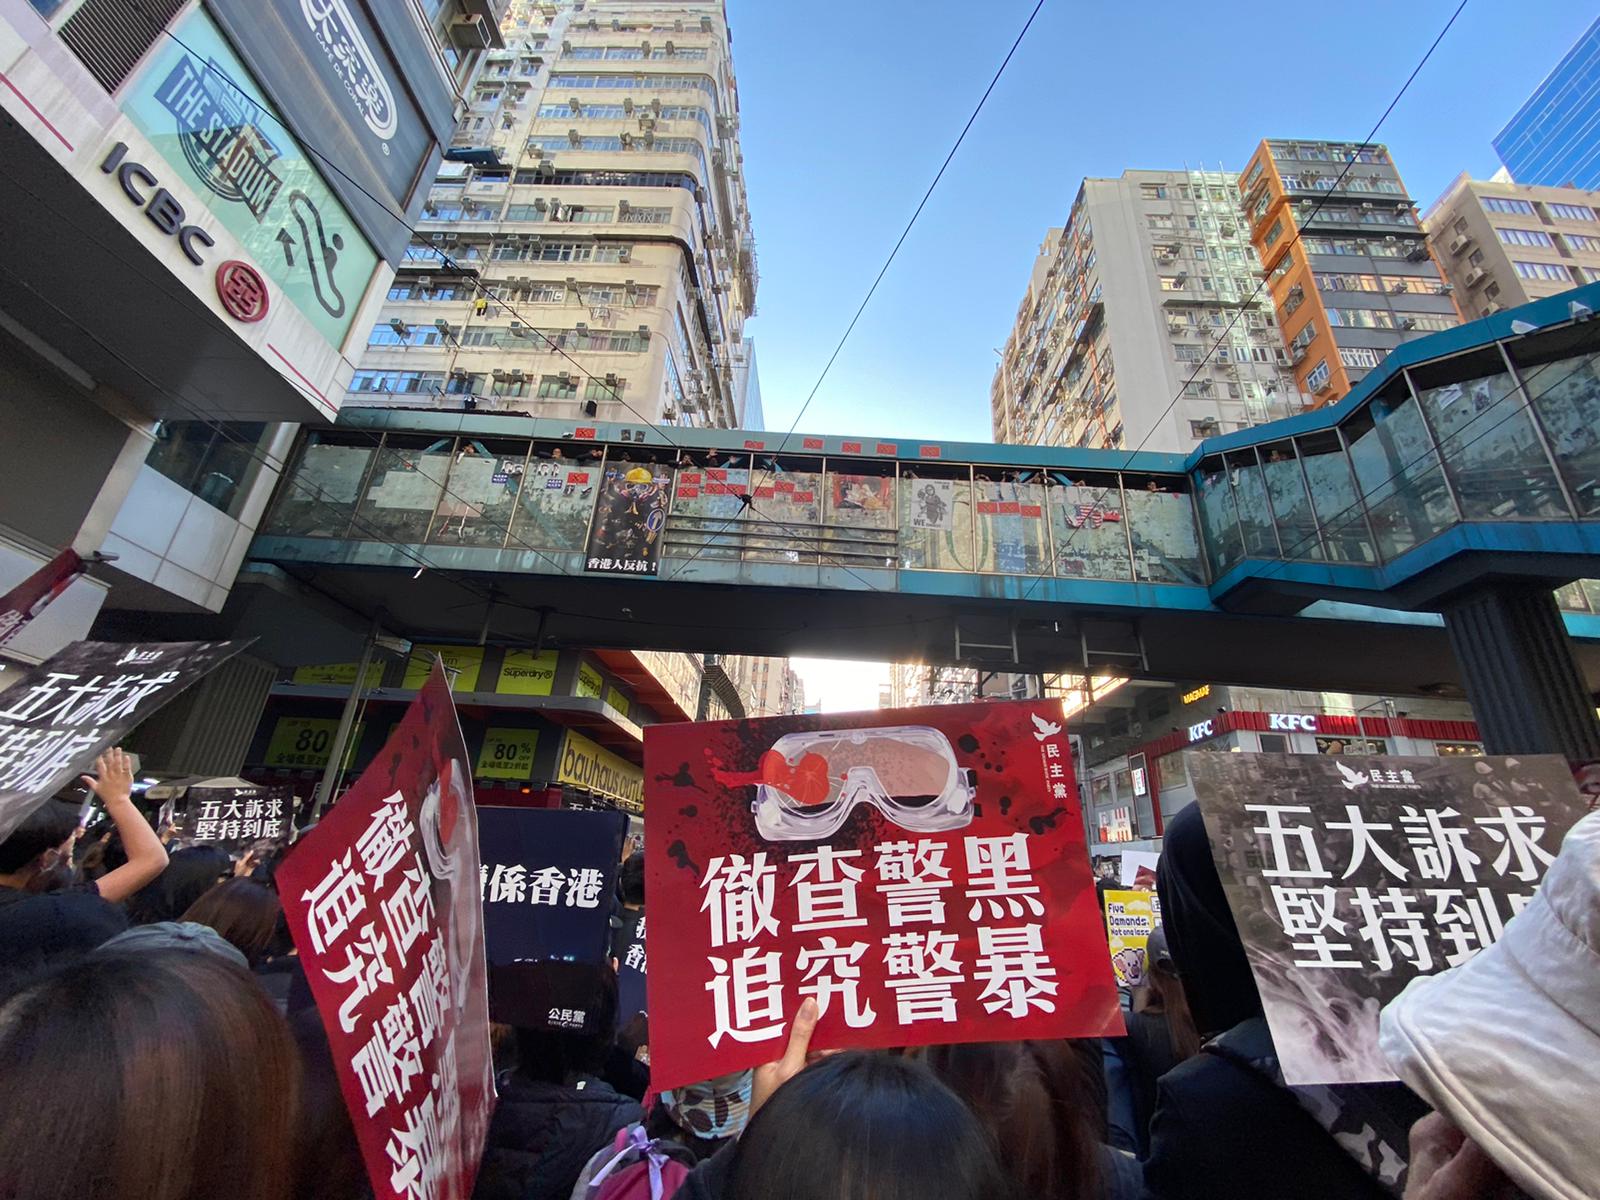 Hong Kong protesters asked for independent investigation on the Police brutality. 